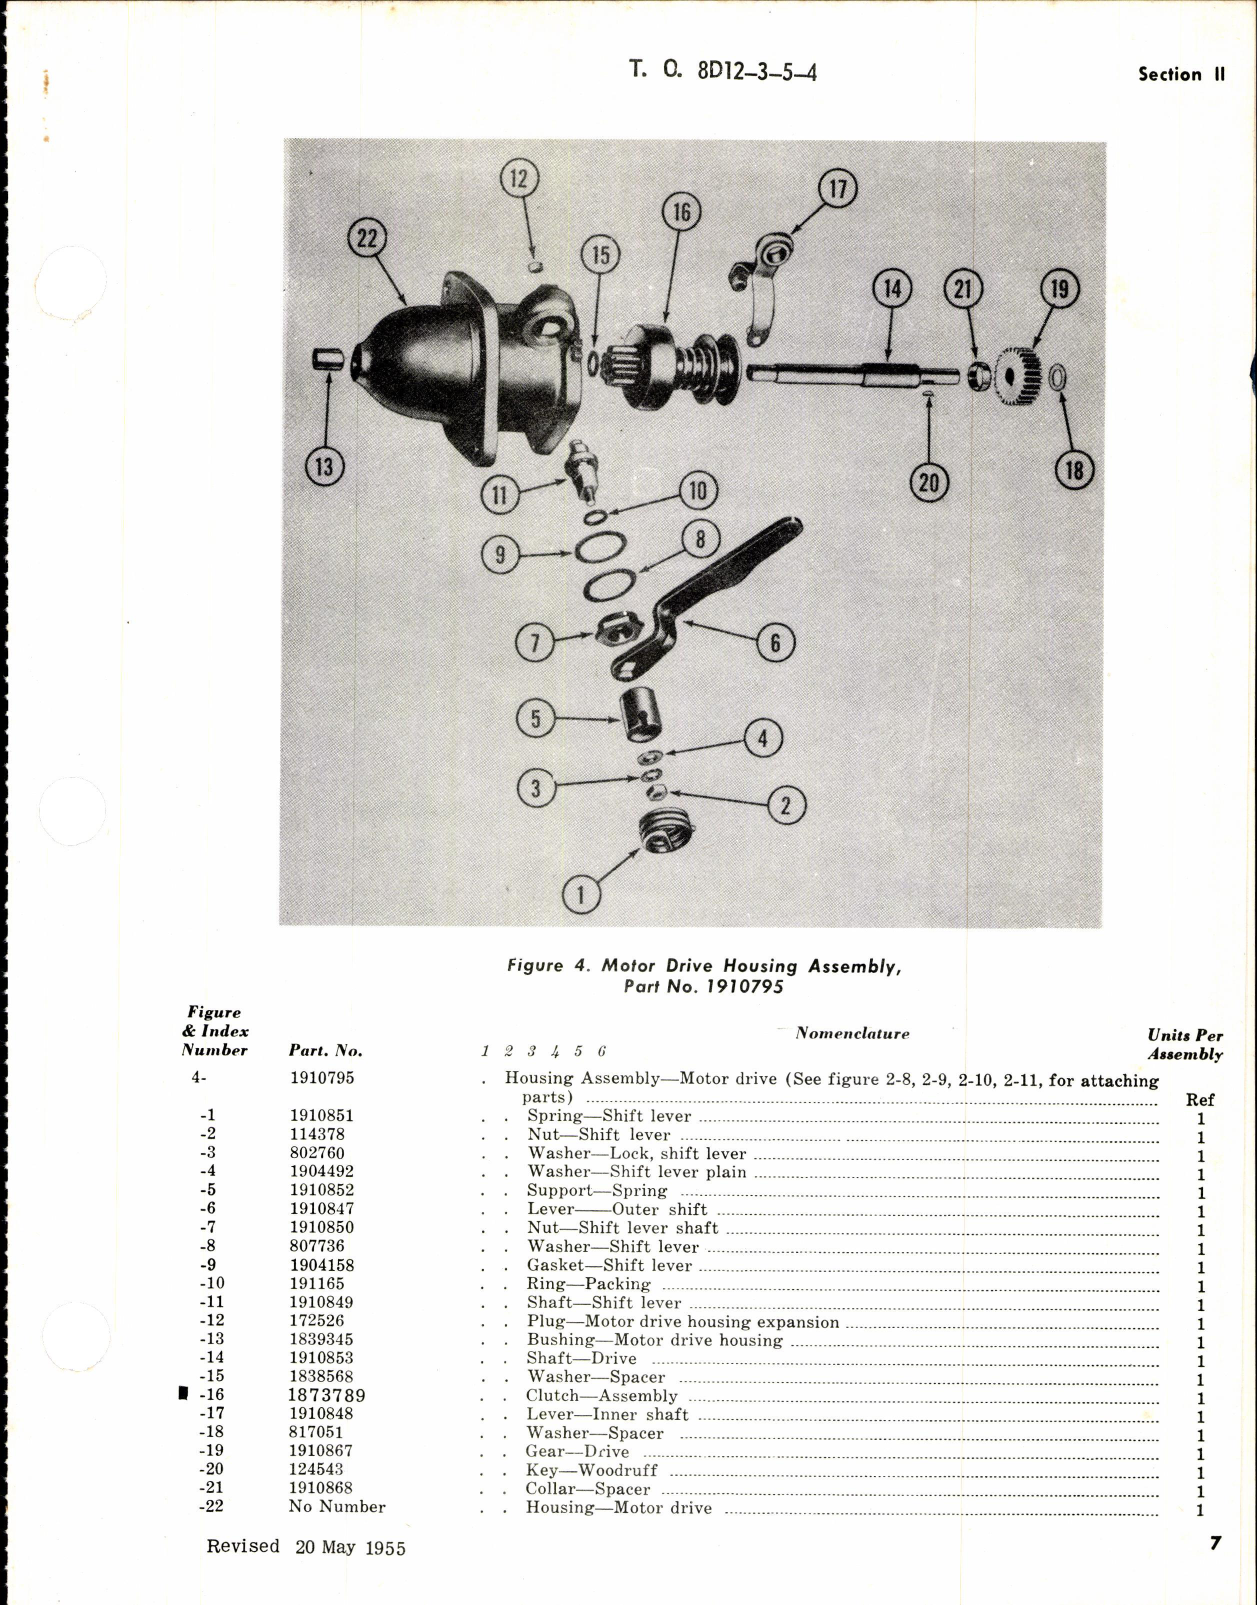 Sample page 3 from AirCorps Library document: Parts Catalog for Starting Motors